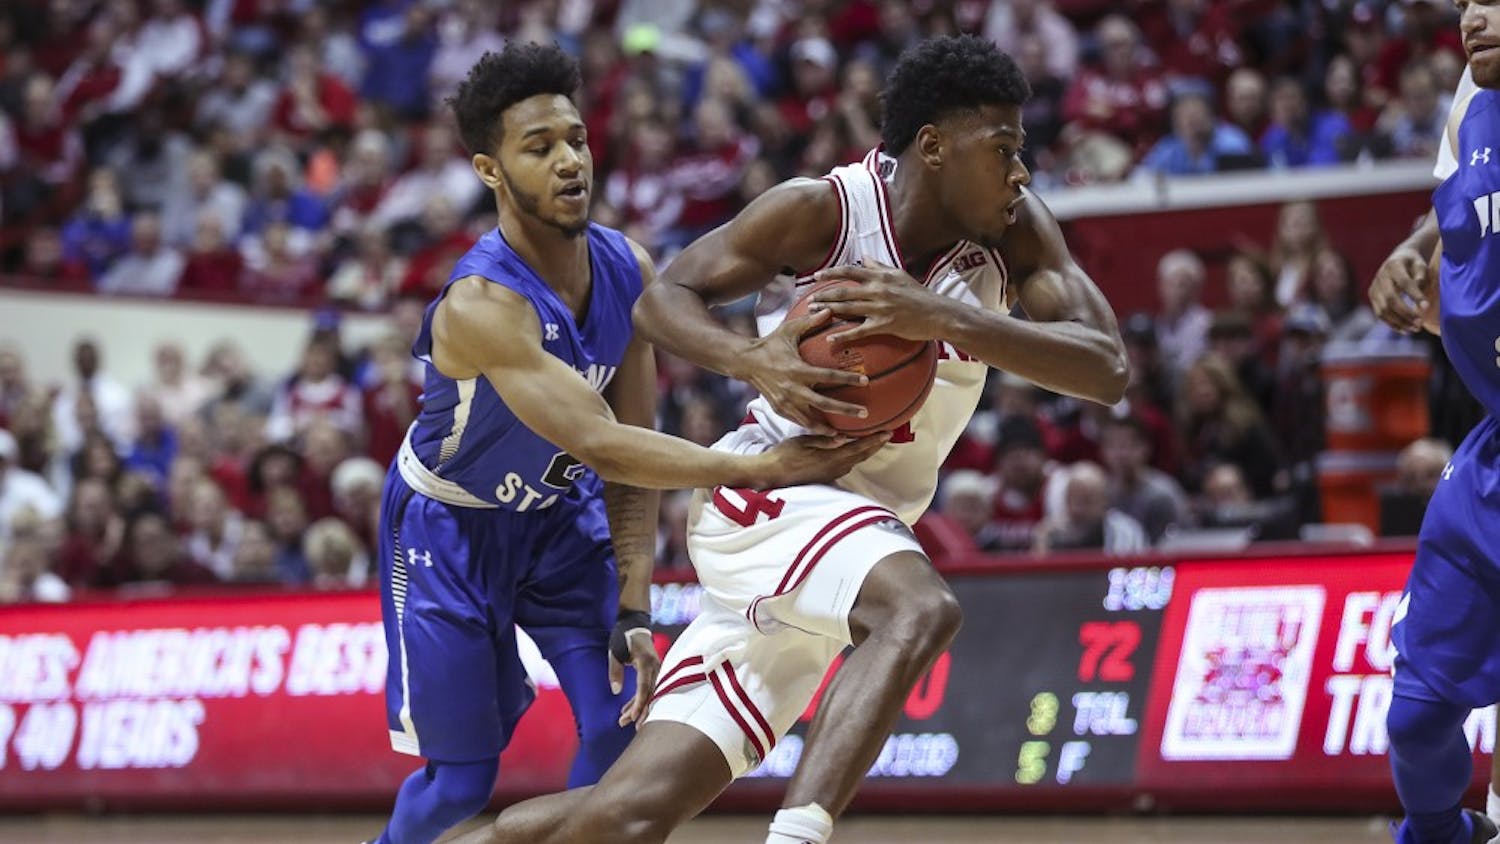 Freshman guard Aljami Durham dribbles the ball during the Hoosiers' game against the Indiana State Sycamores on Friday. The Hoosiers lost to the Sycamores, 90-69.